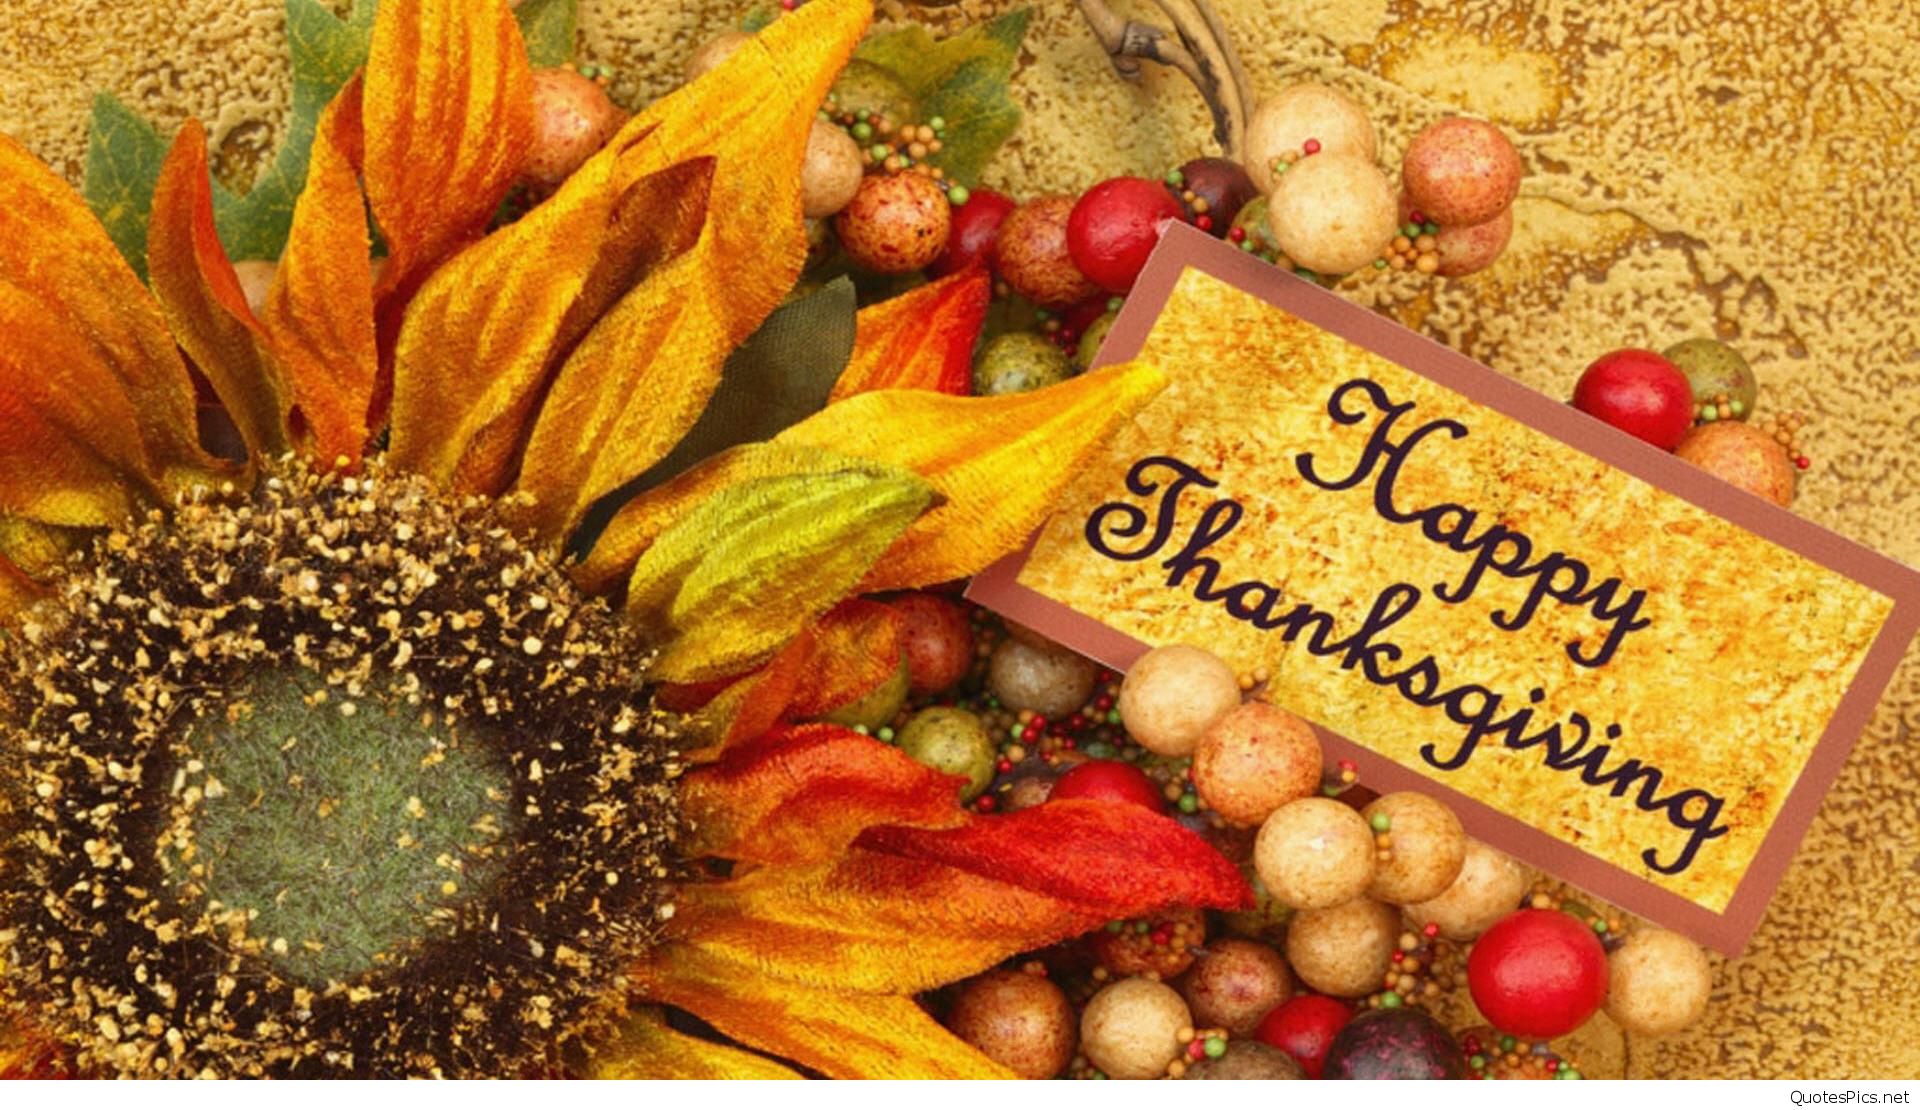 Lioher happy-thanksgiving-wallpaper-HD5 HAPPY THANKS GIVING  FROM LIOHER TEAM  